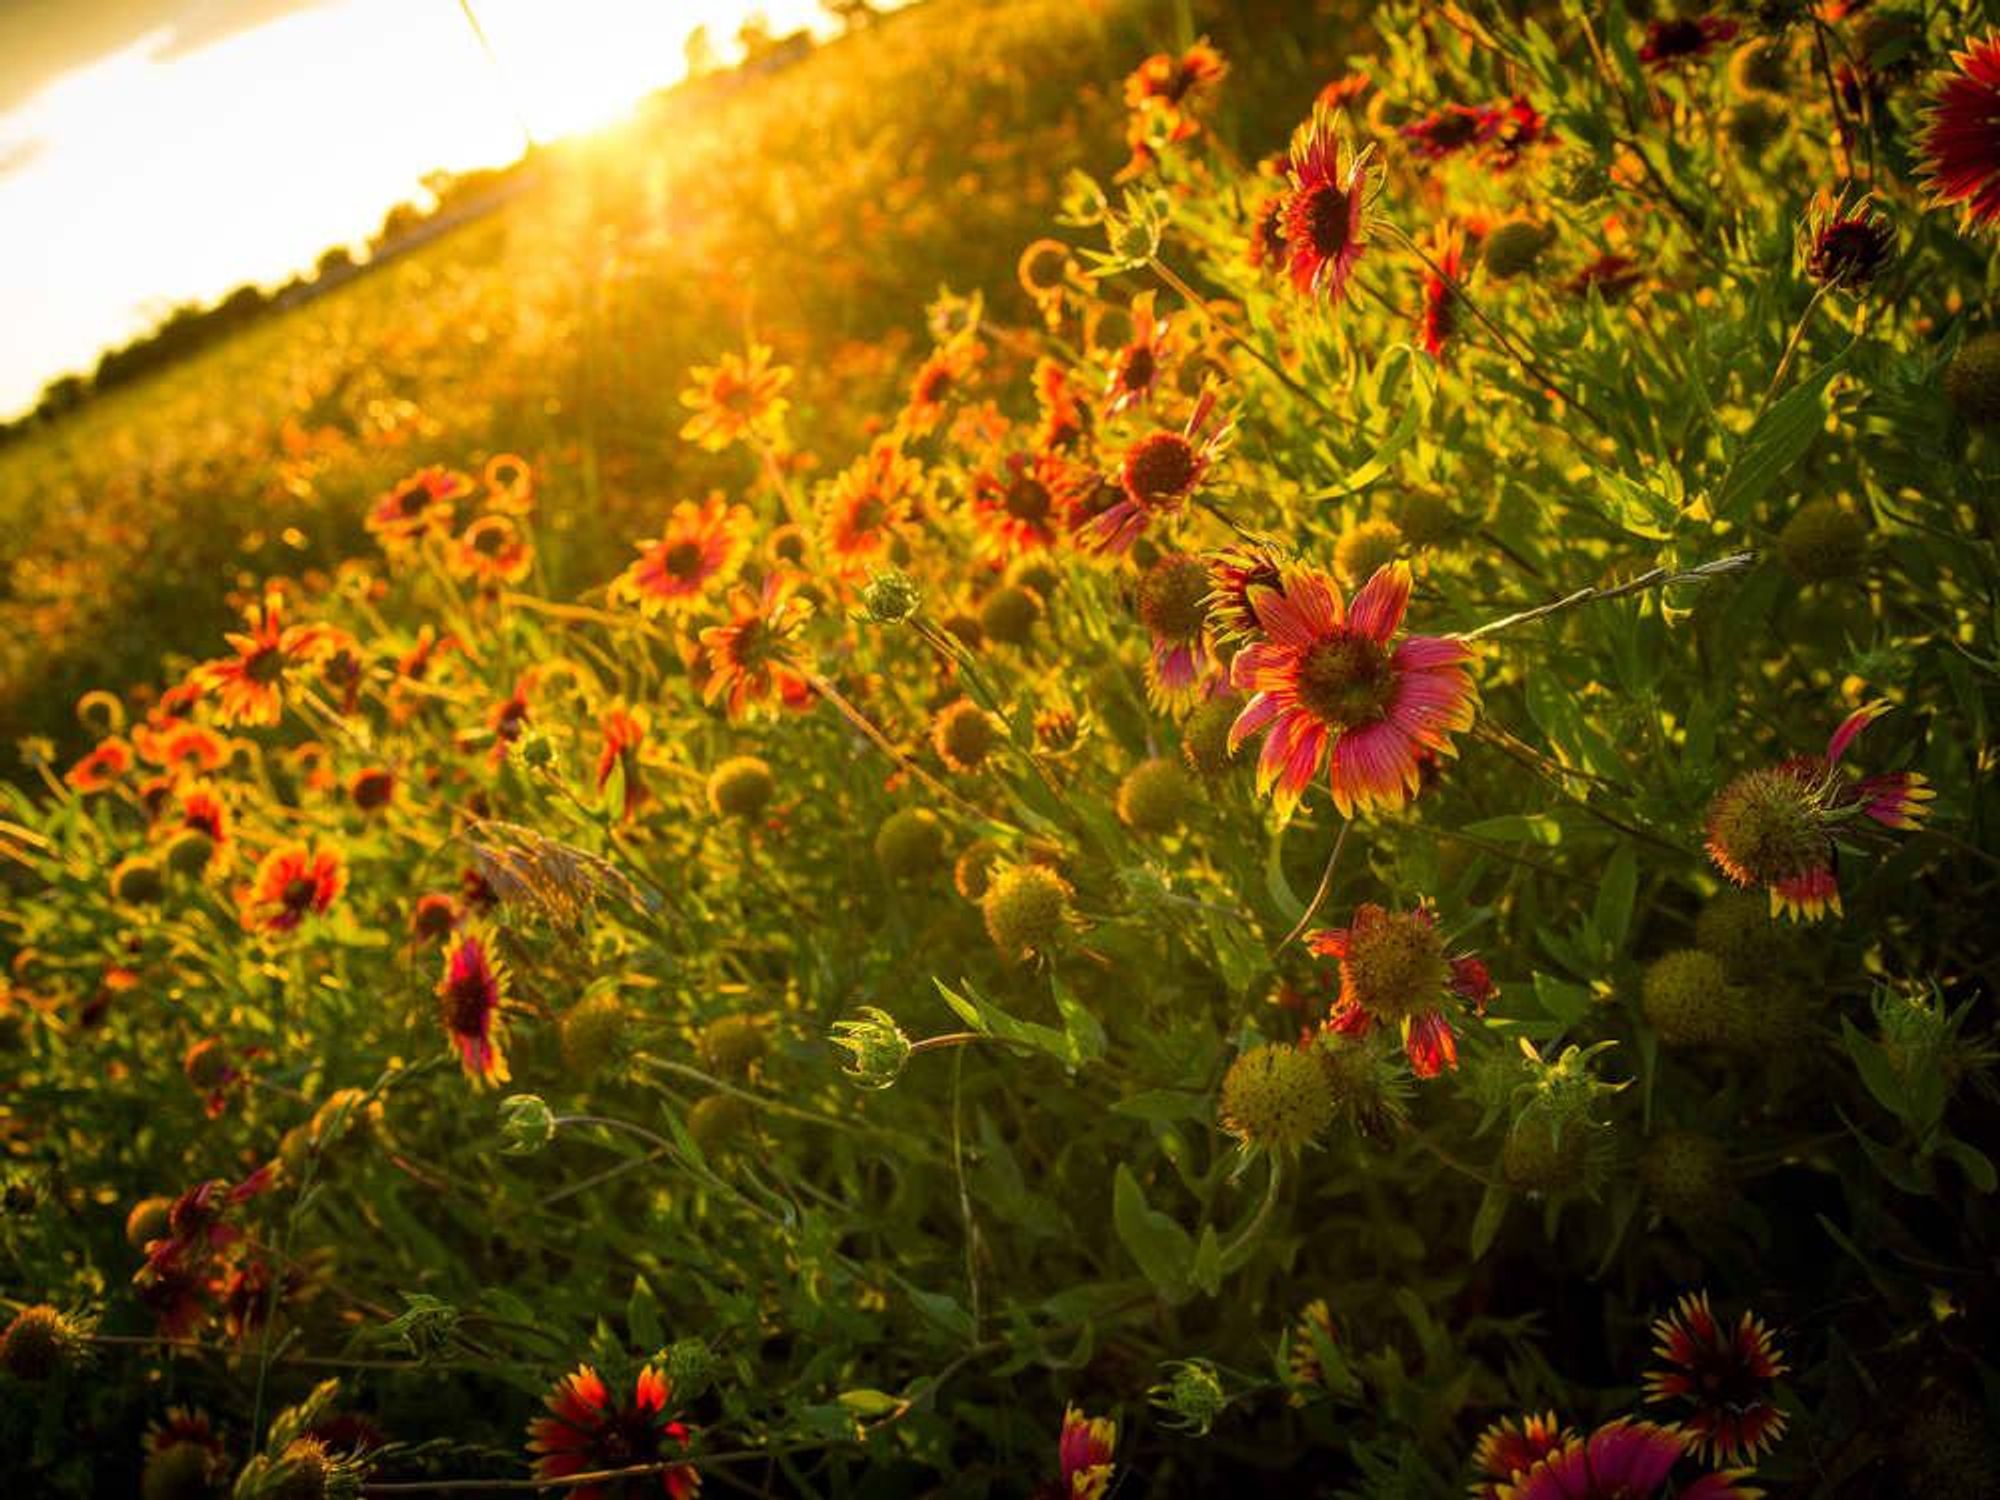 Picture of Indian blanket wildflowers at sunset